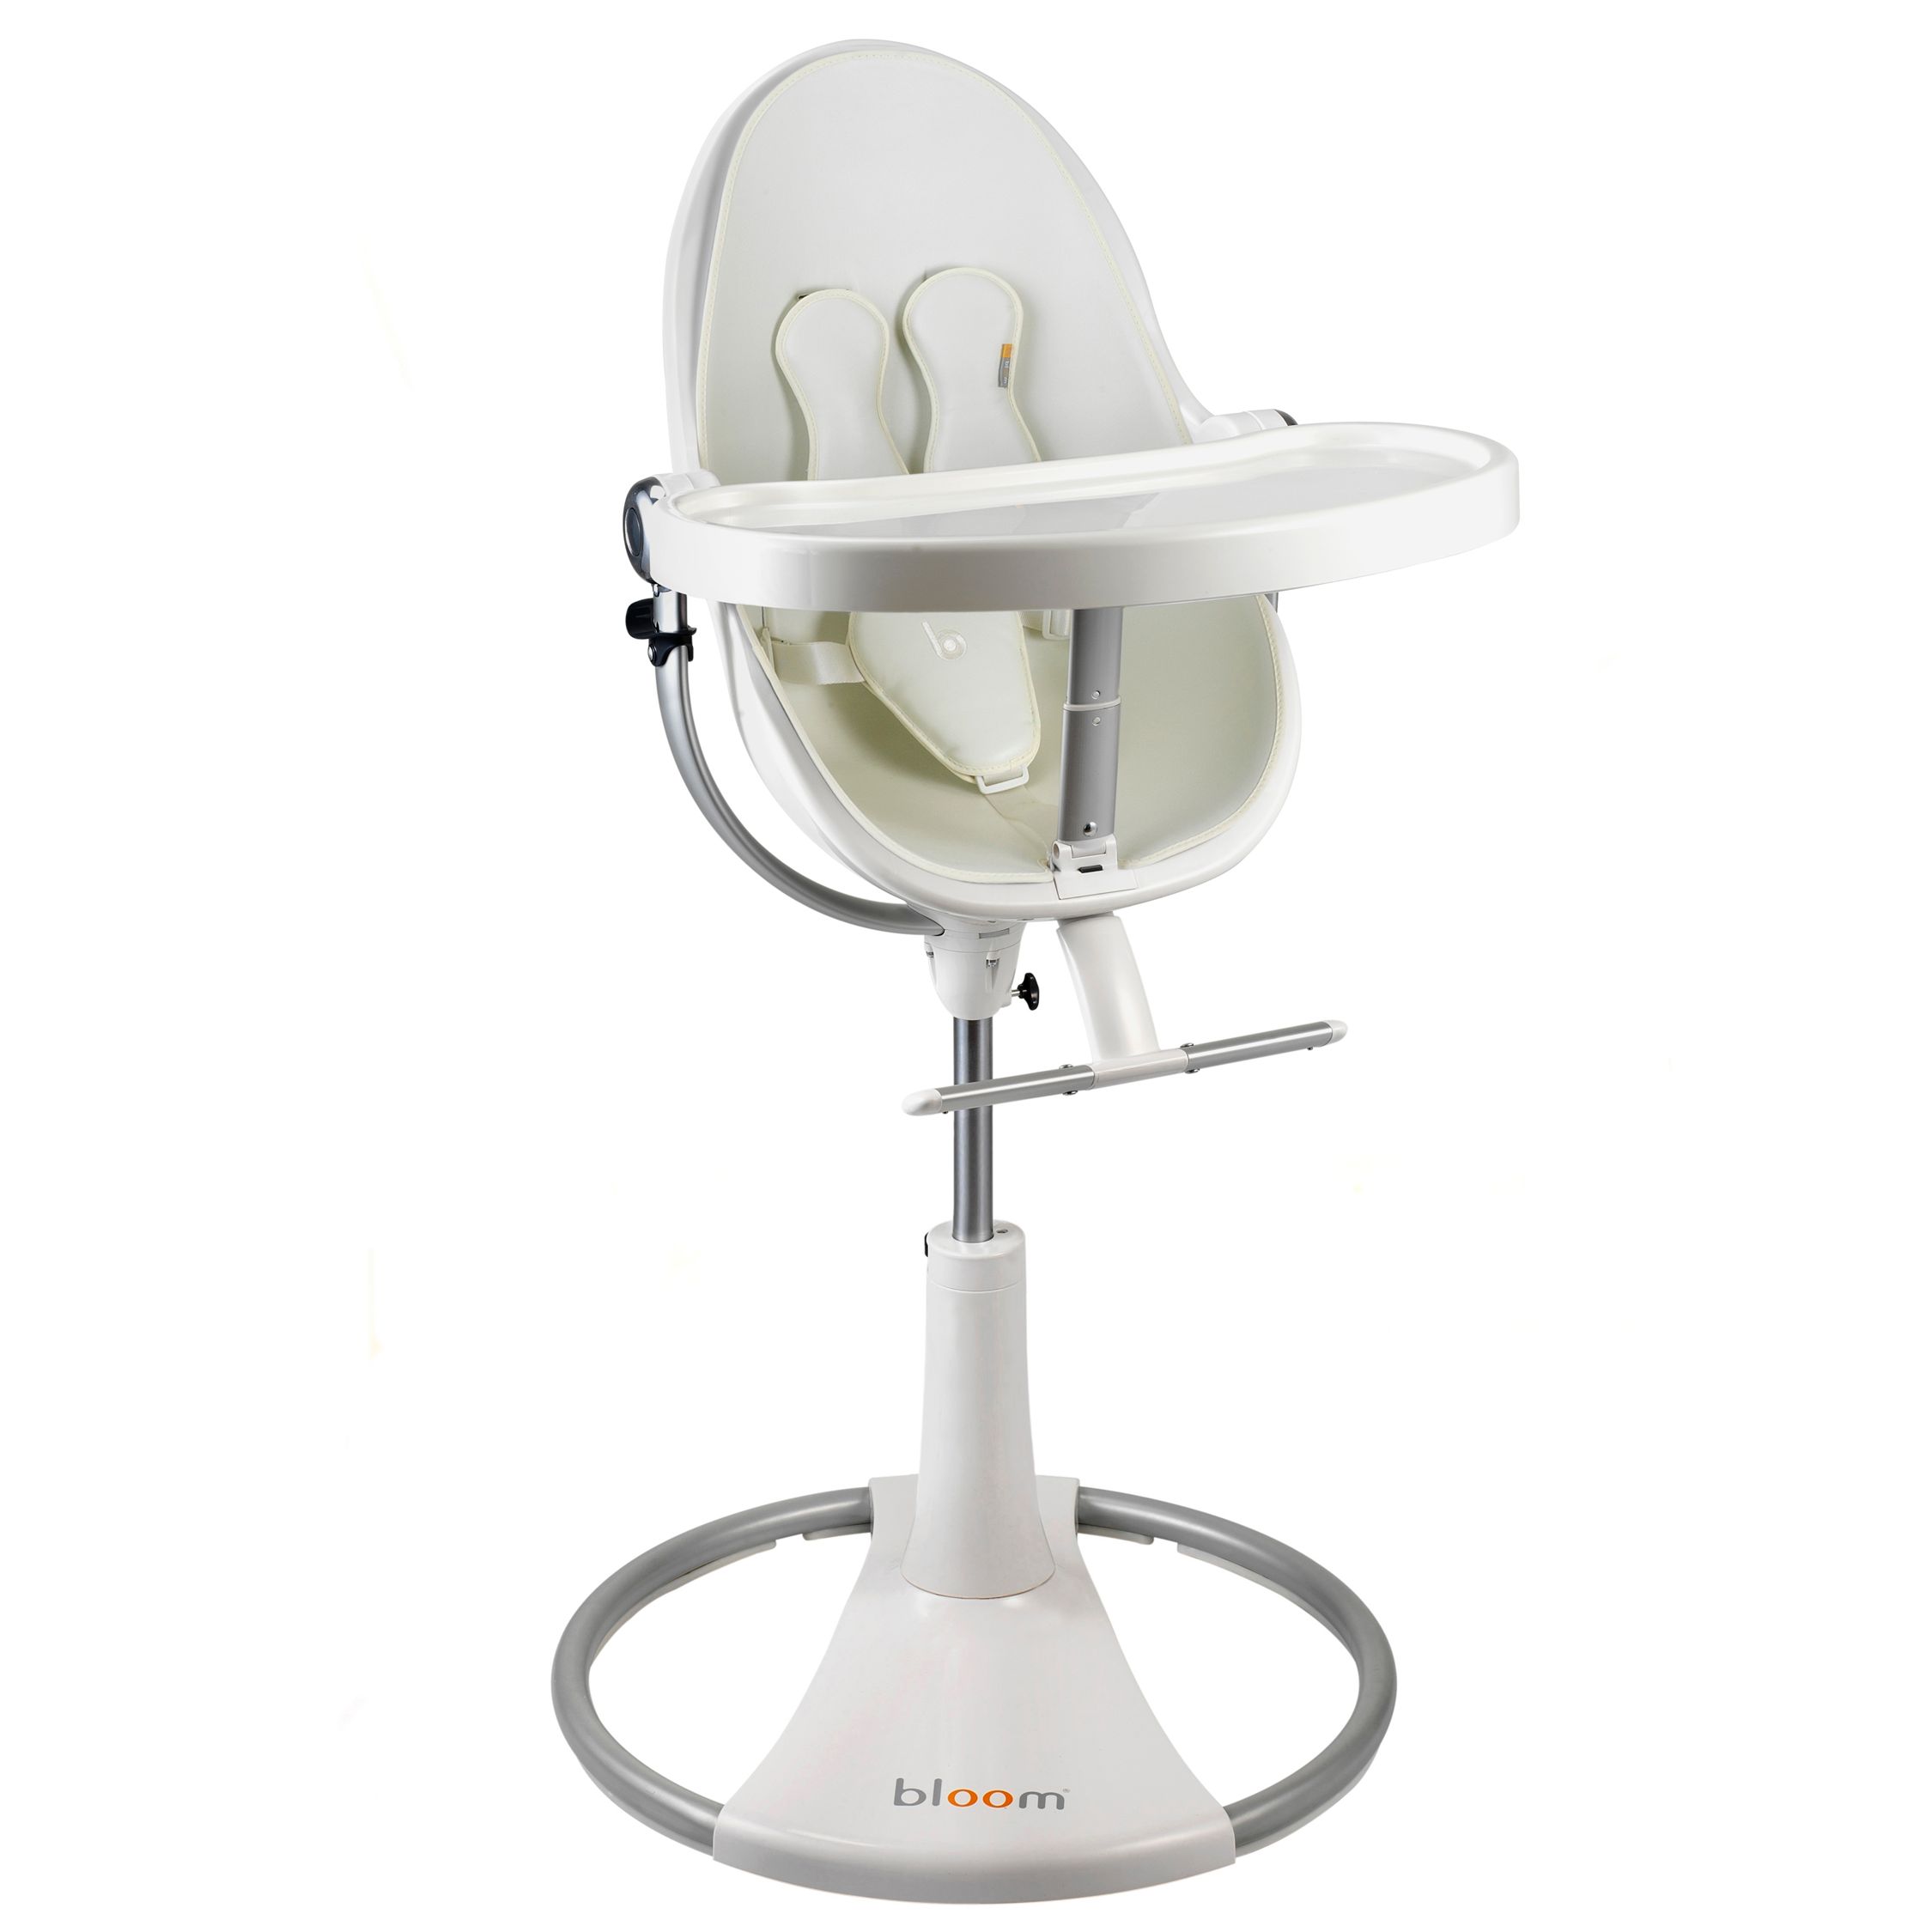 bloom Fresco Loft Contemporary Leatherette Baby Chair, Ivory White with Coconut White at John Lewis